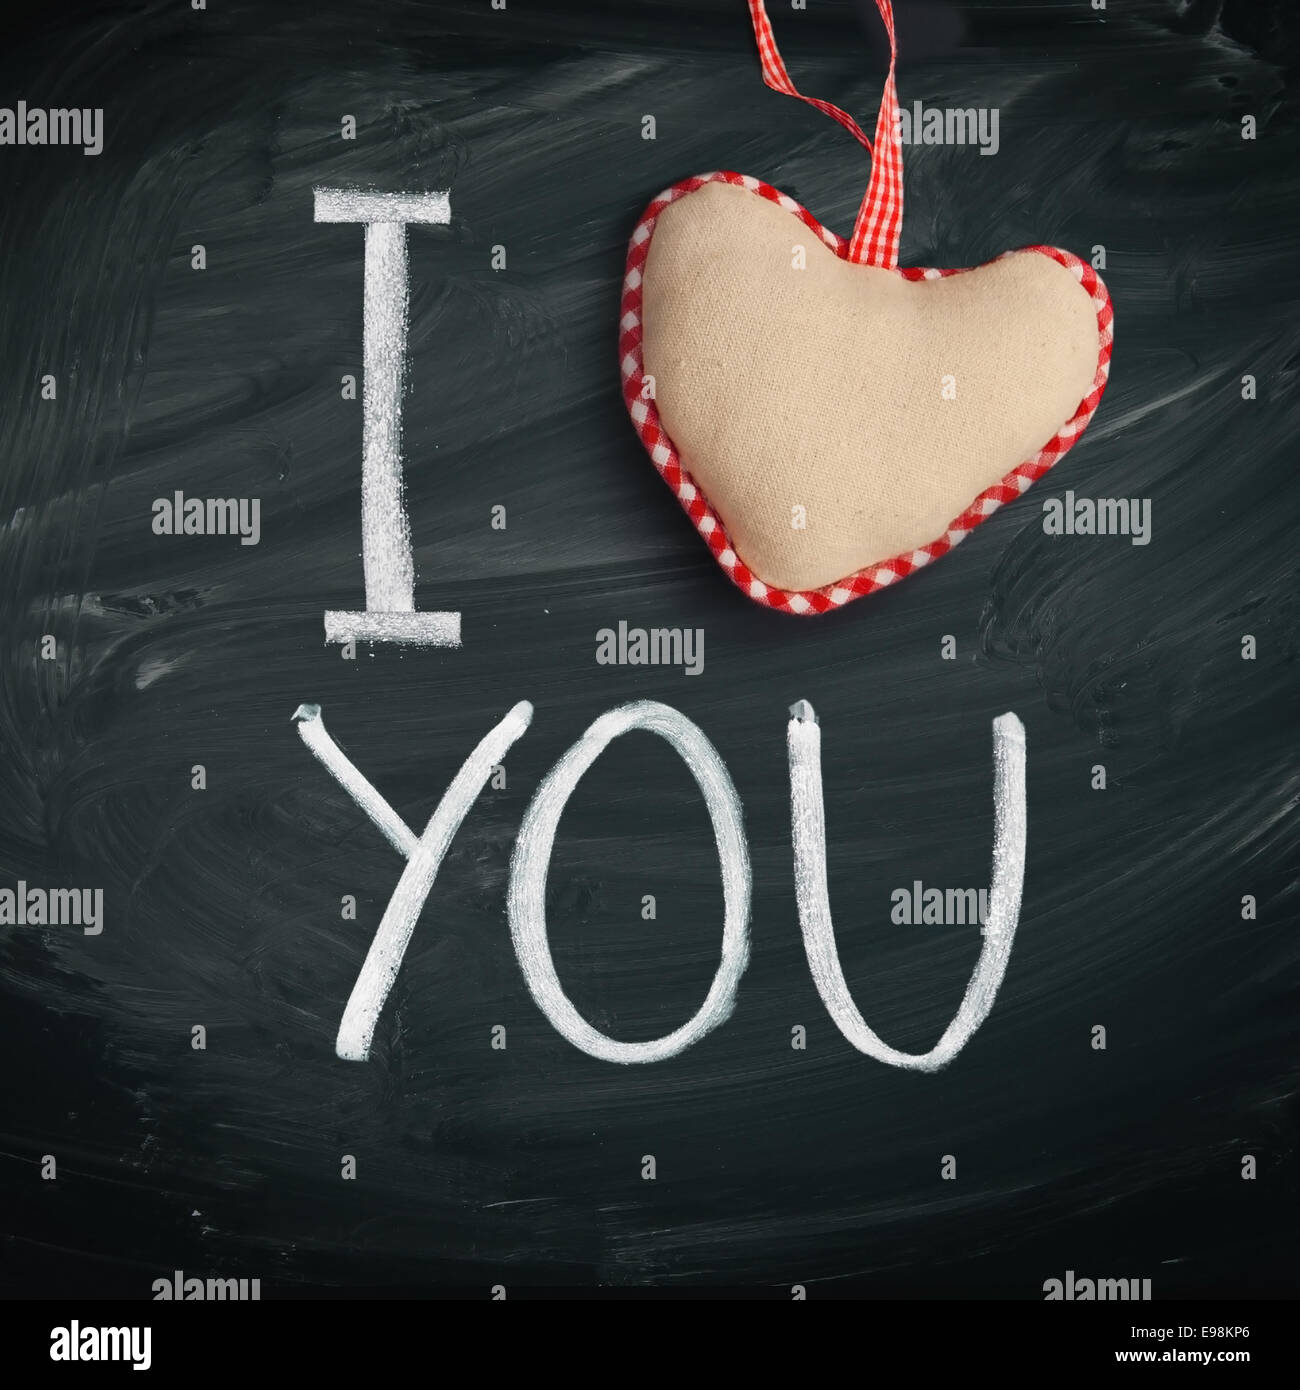 I Love You. Handwritten message on a chalkboard with a rustic needlework heart used as a symbol of love in this Valentines message. Stock Photo